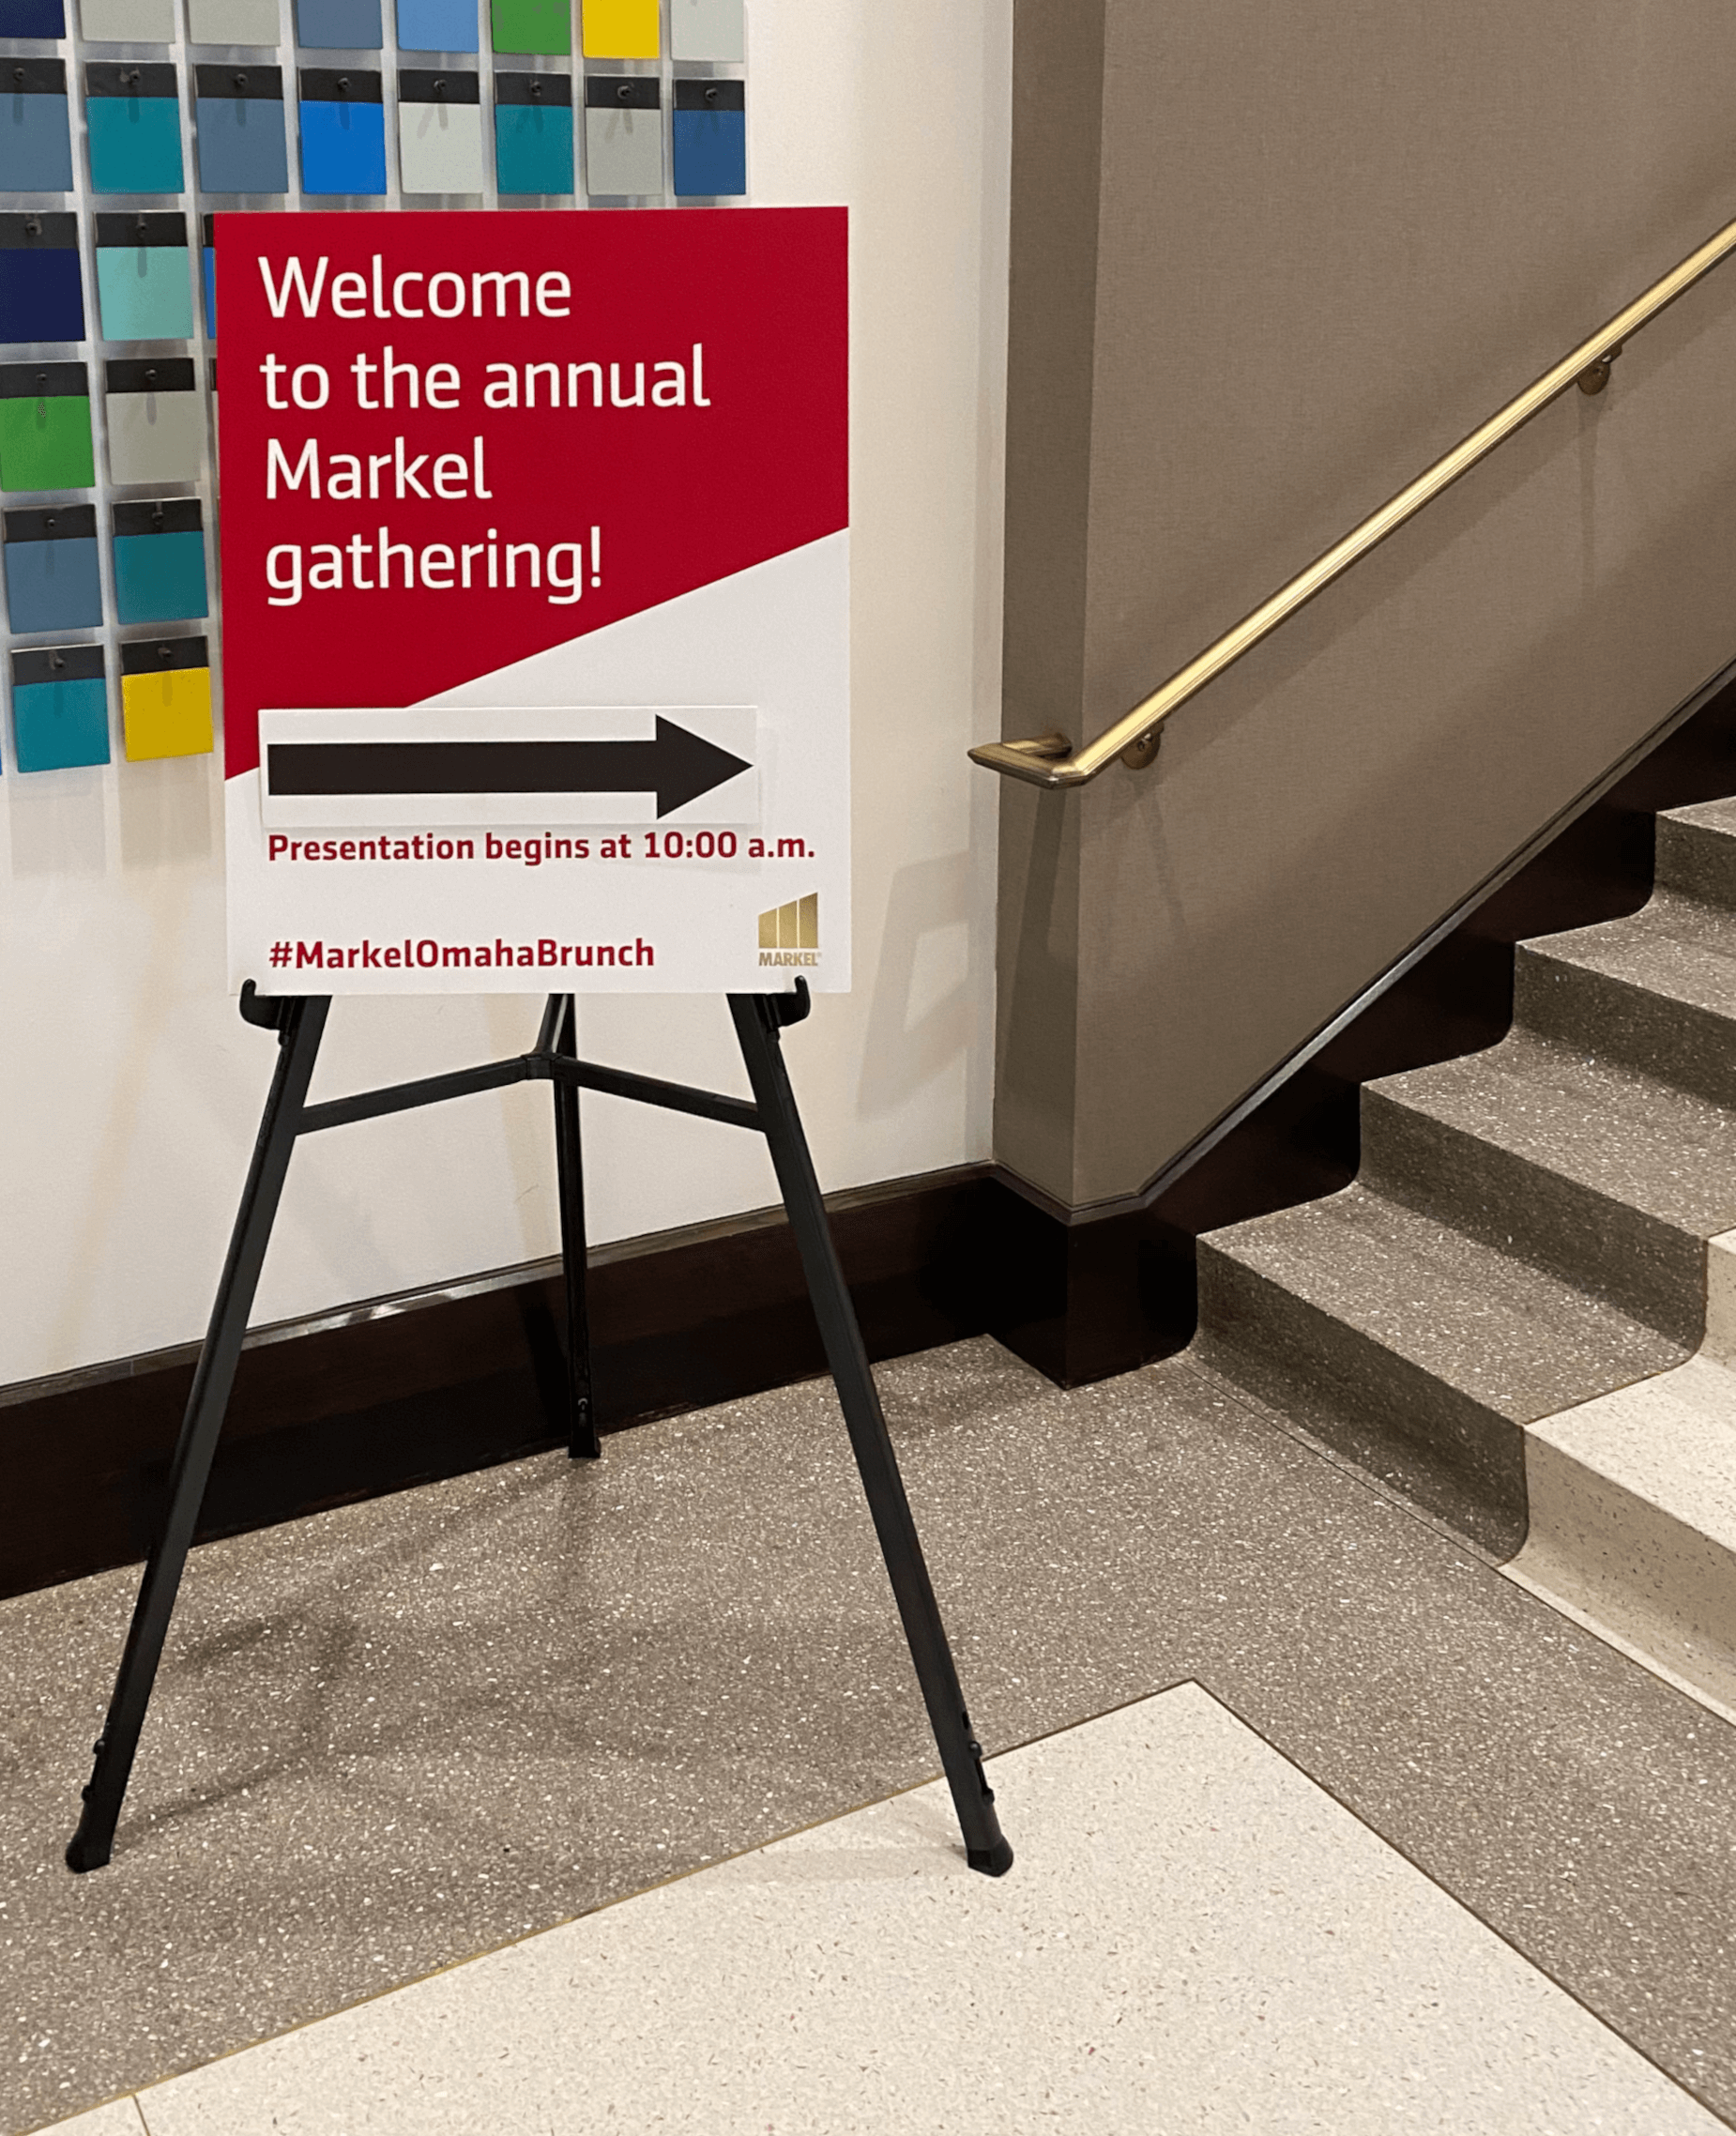 Welcome sign and signpost to the annual Markel meeting in Omaha